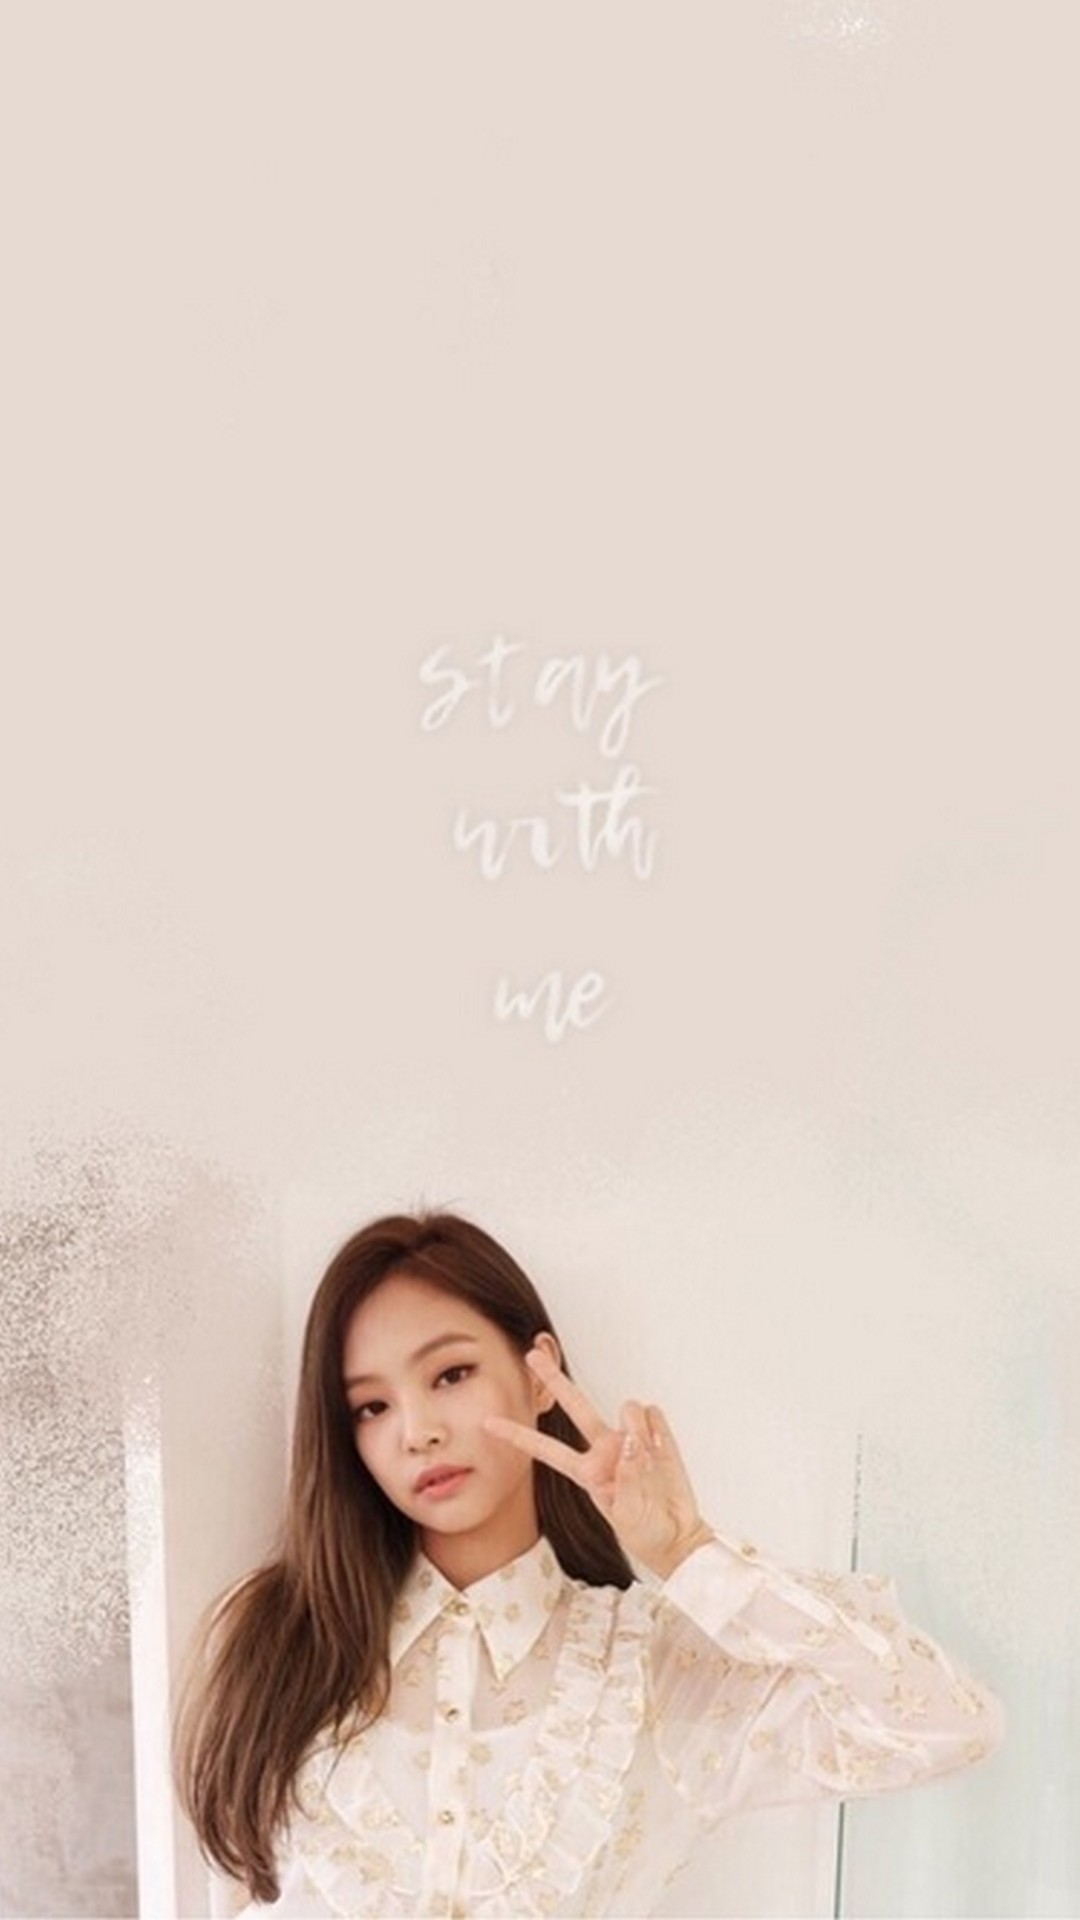 Jennie Blackpink iPhone Wallpaper in HD with high-resolution 1080x1920 pixel. You can set as wallpaper for Apple iPhone X, XS Max, XR, 8, 7, 6, SE, iPad. Enjoy and share your favorite HD wallpapers and background images